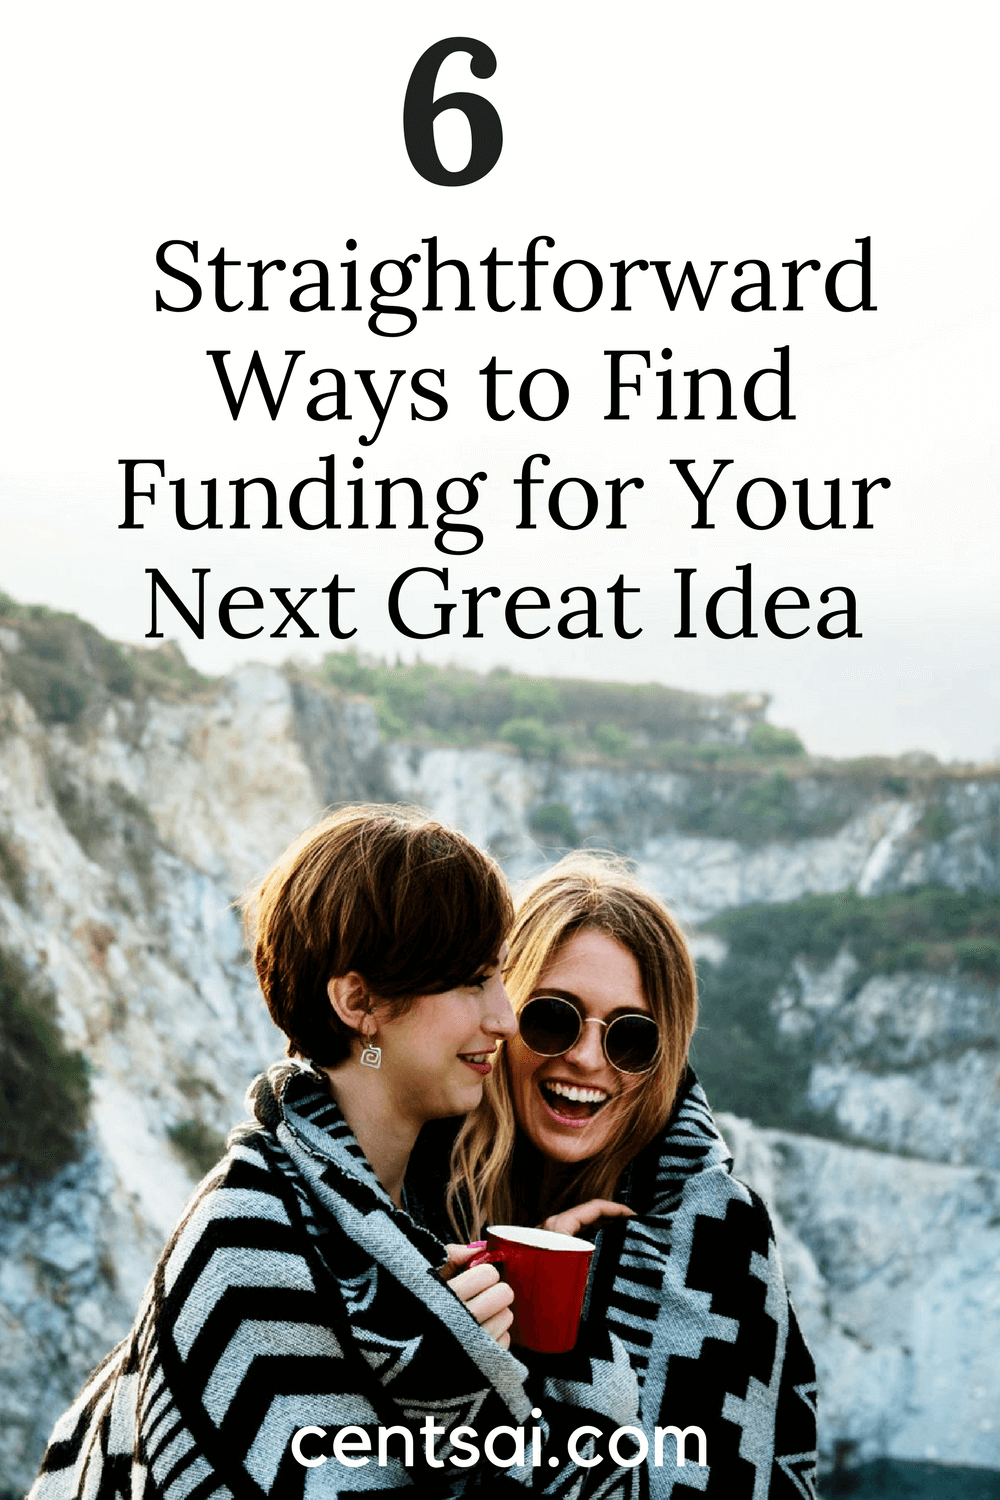 6 Straightforward Ways to Find Funding for Your Next Great Idea